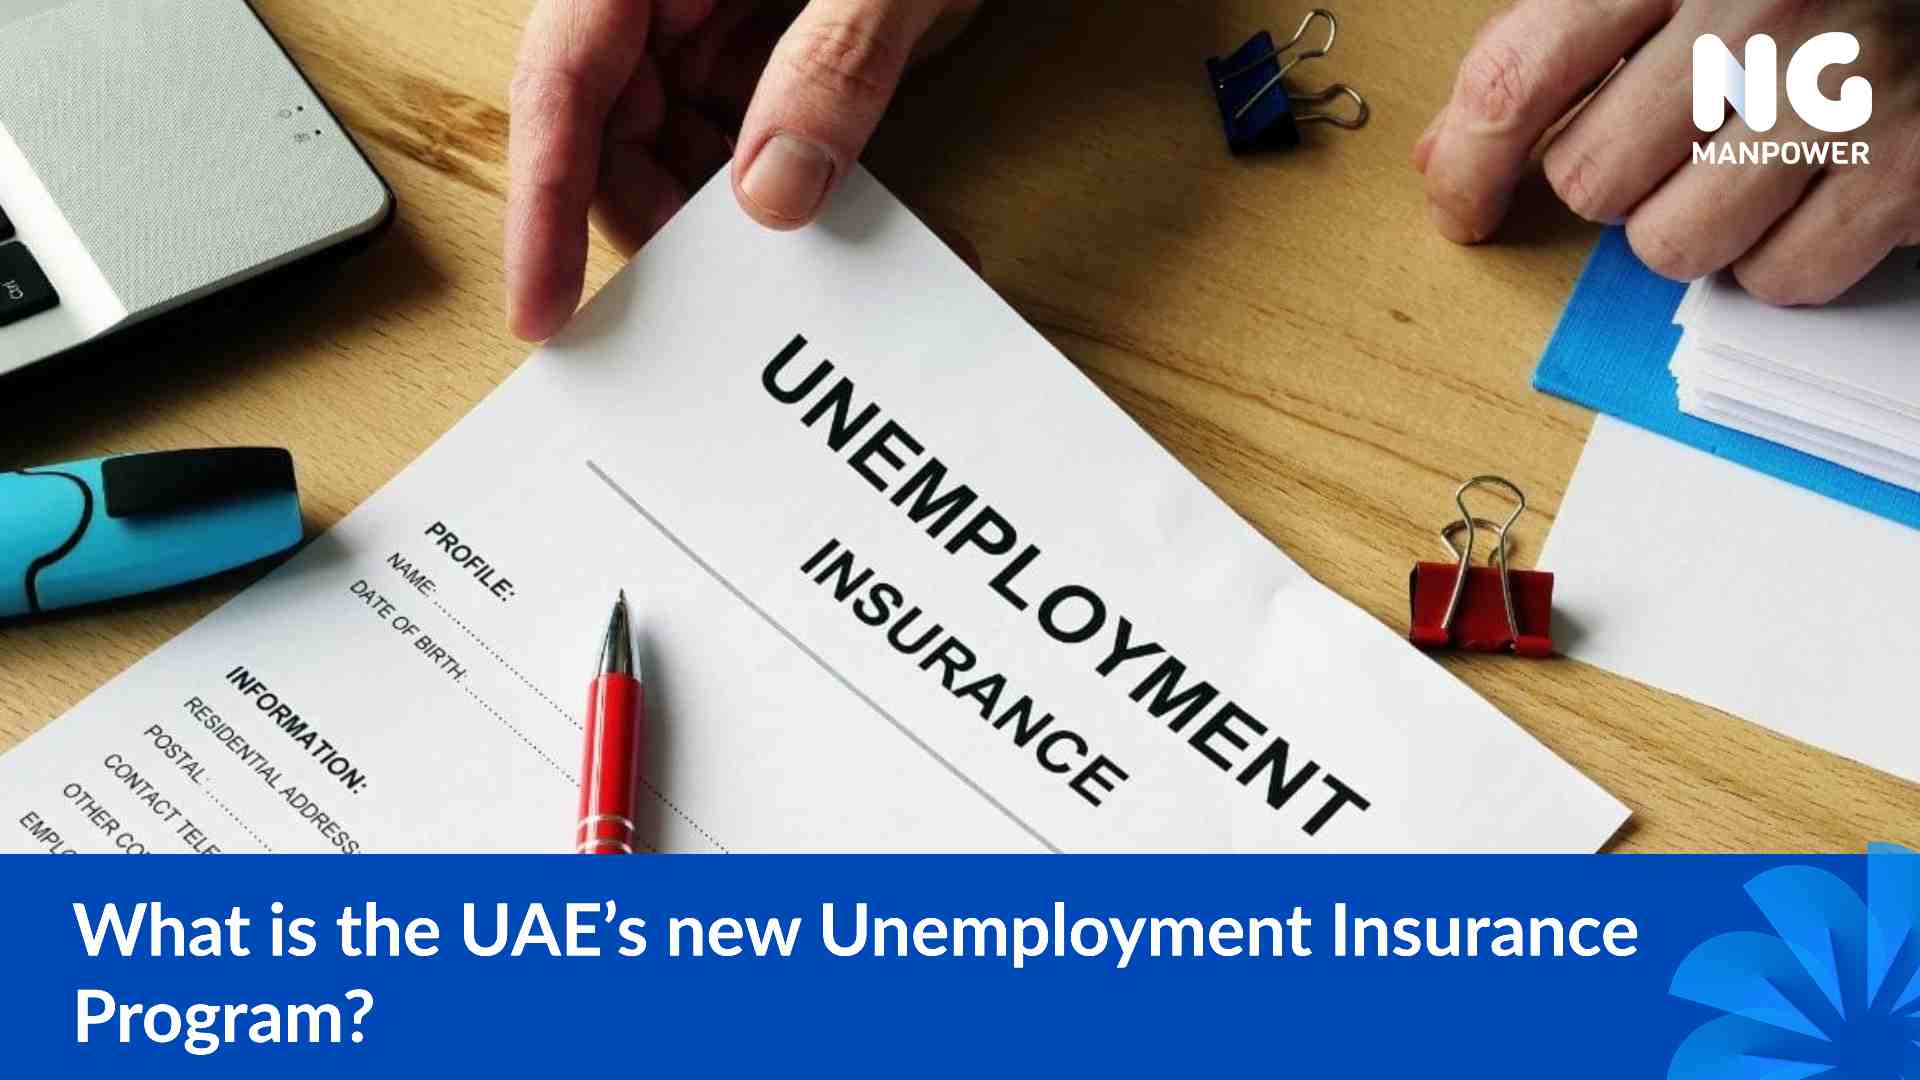 Unemployment Insurance in the UAE